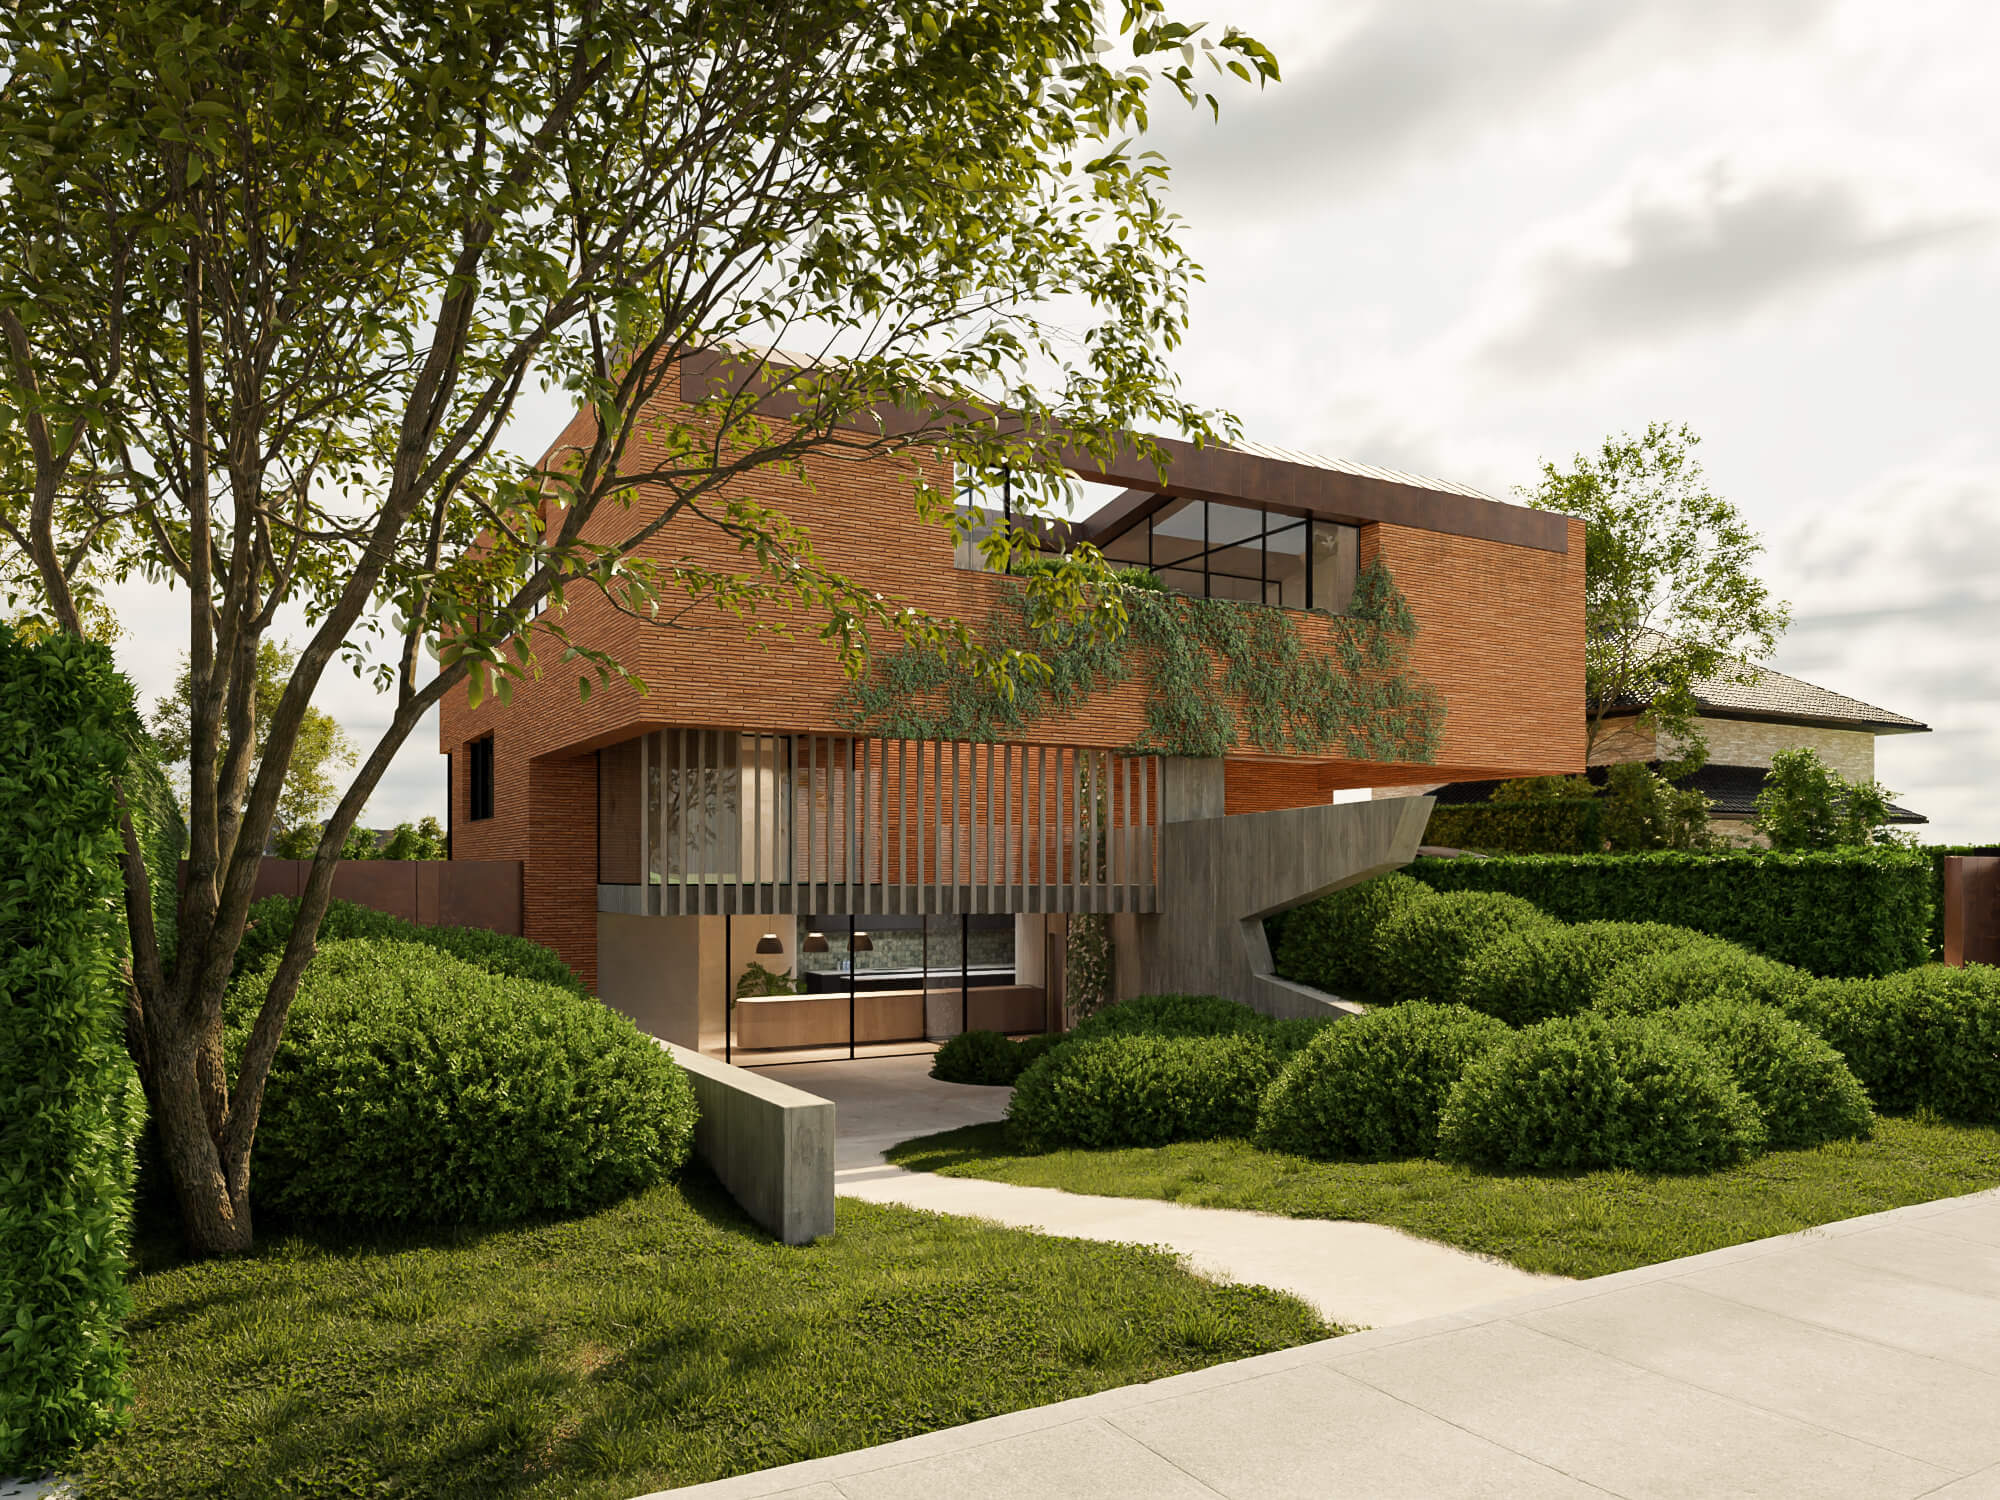 Front view of a contemporary architectural project by architects Claerhout- Van Biervliet using red brick, patinated red copper and wood cast concrete.